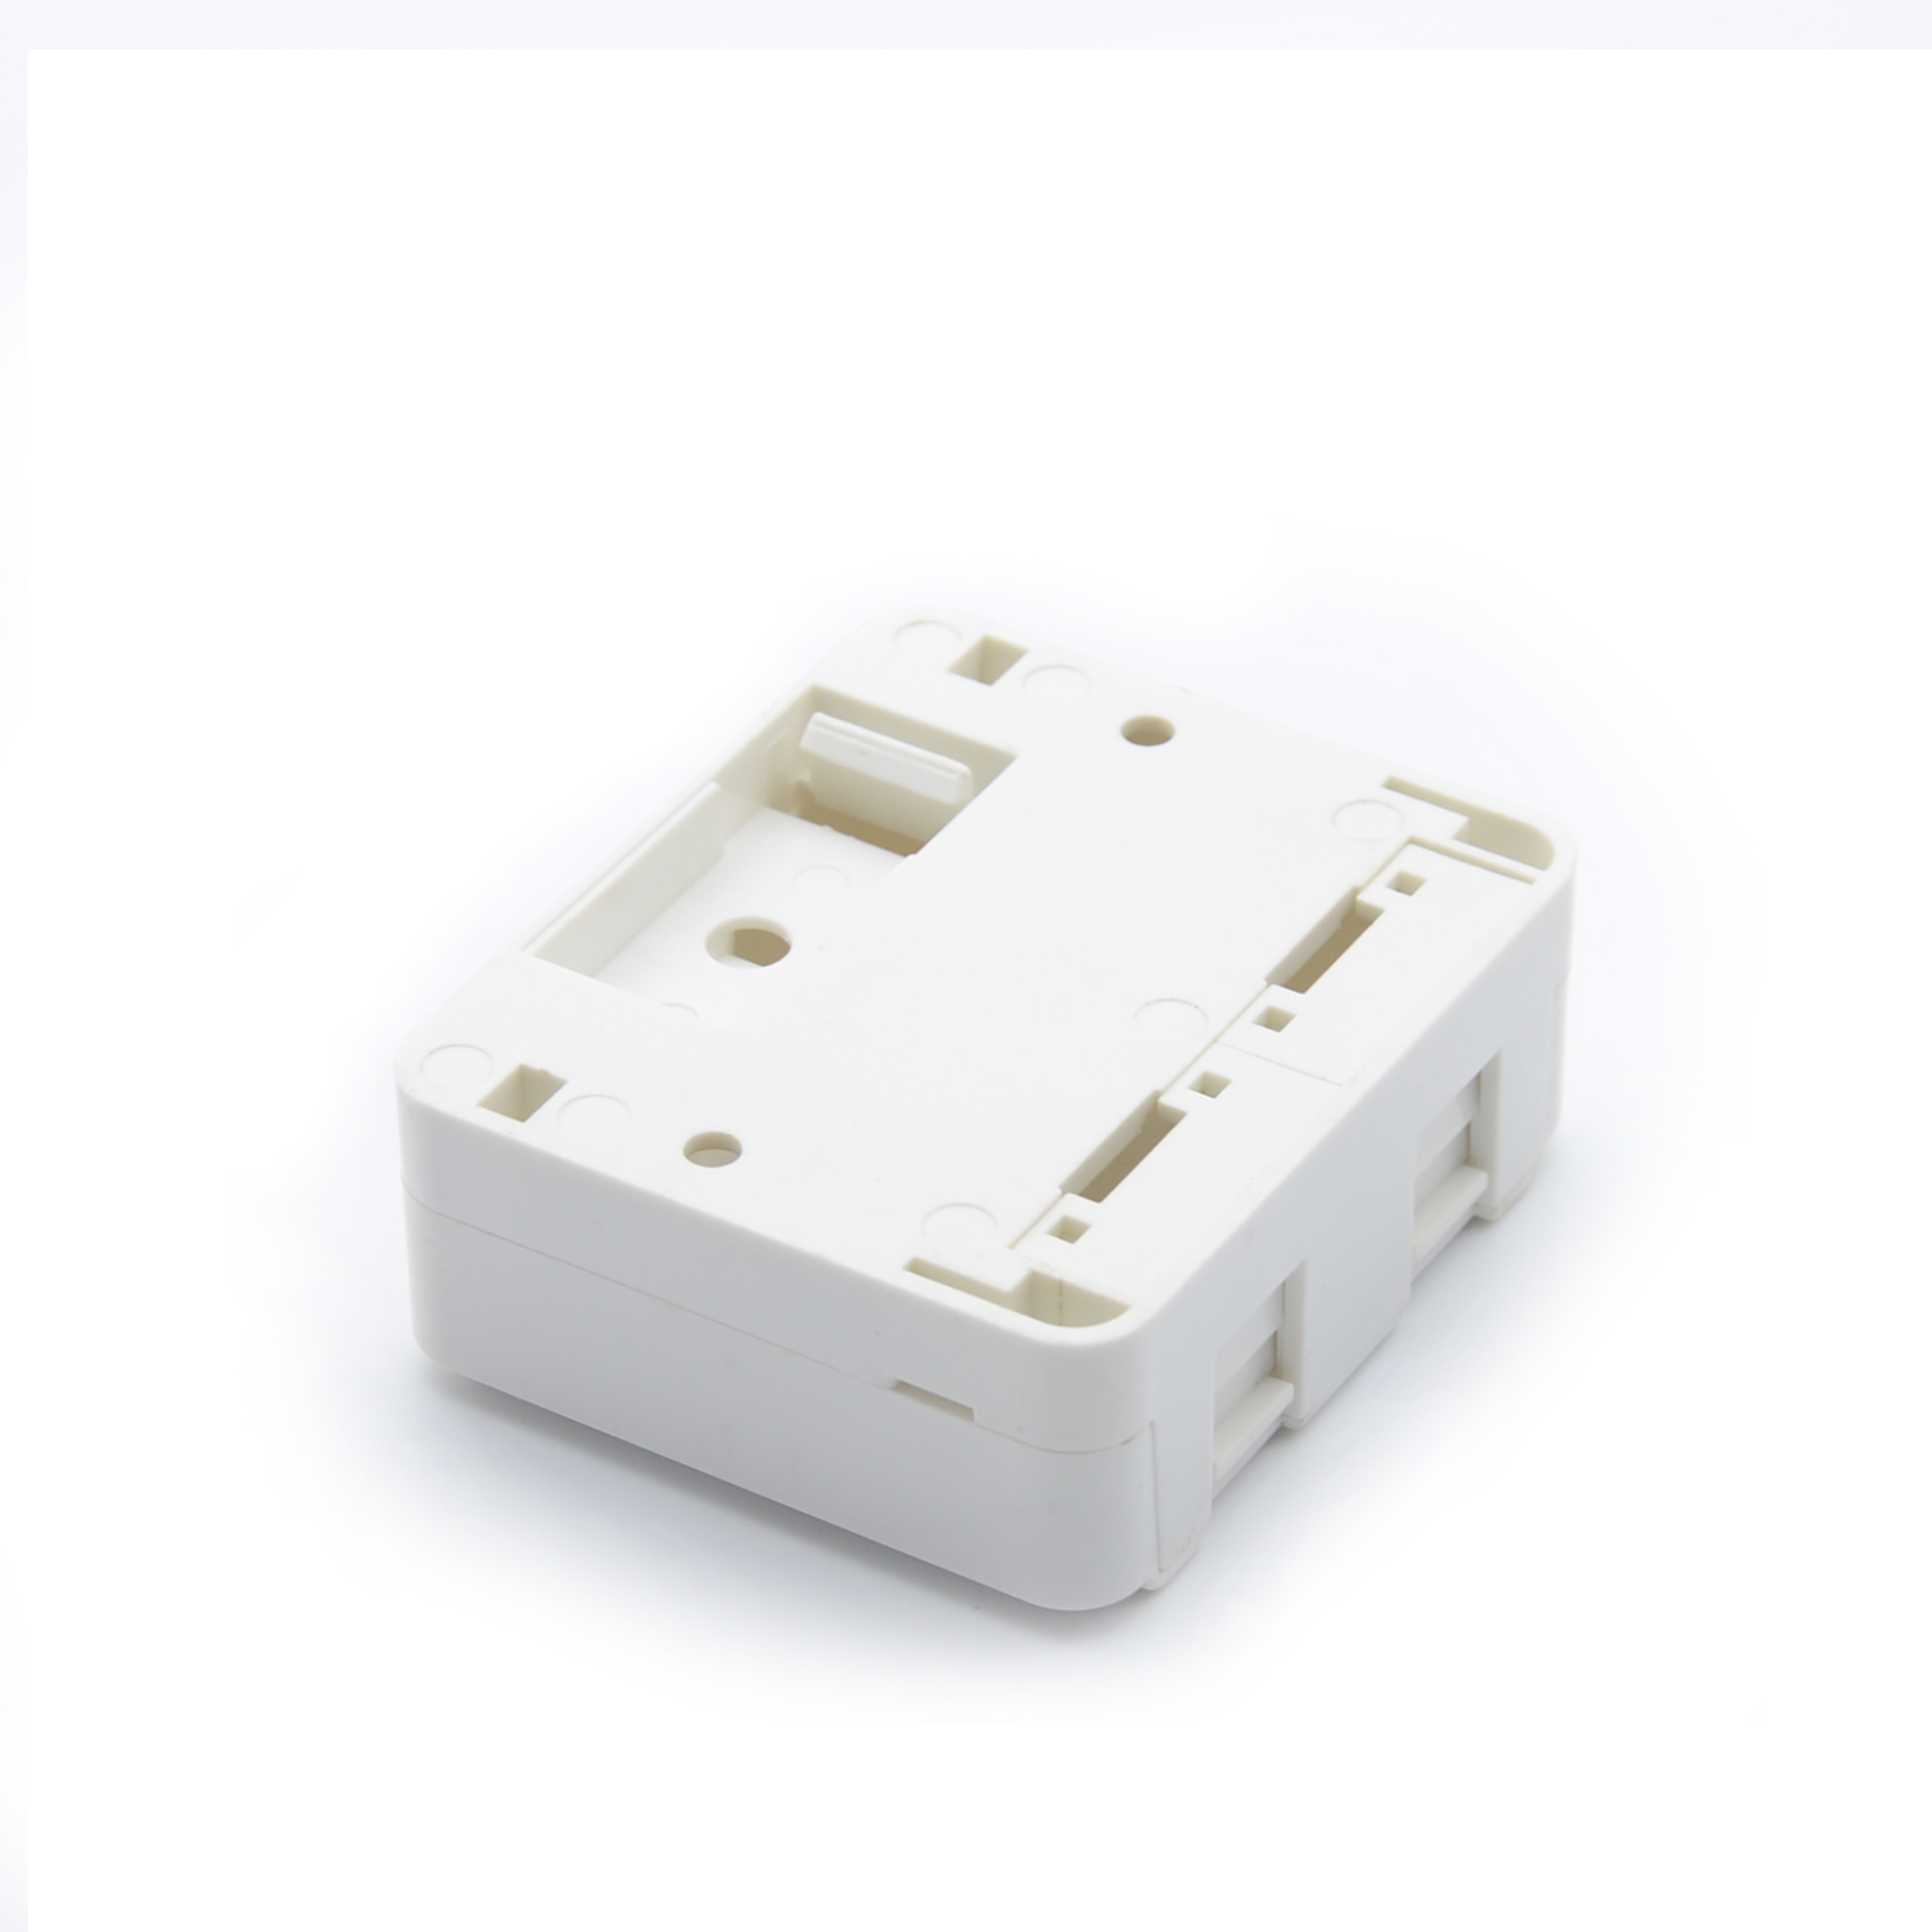 MT-5823 Keystone Jack Network Outlet Network Cable Surface Box Surface Wall Mount Box Single Dual Port